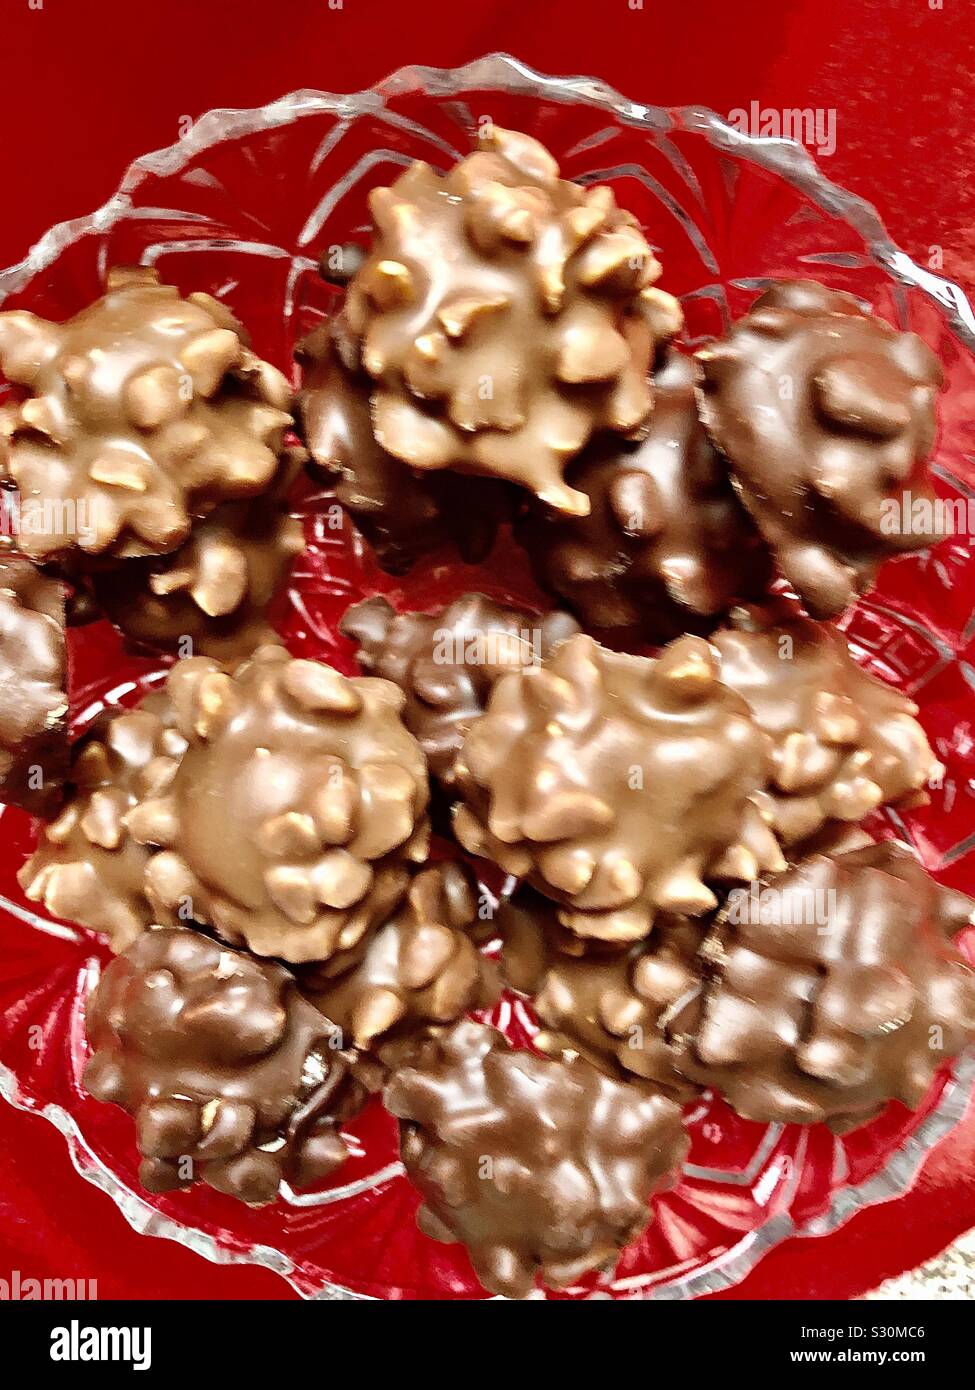 Delicious chocolates with hazelnuts and filled with liqueur Stock Photo